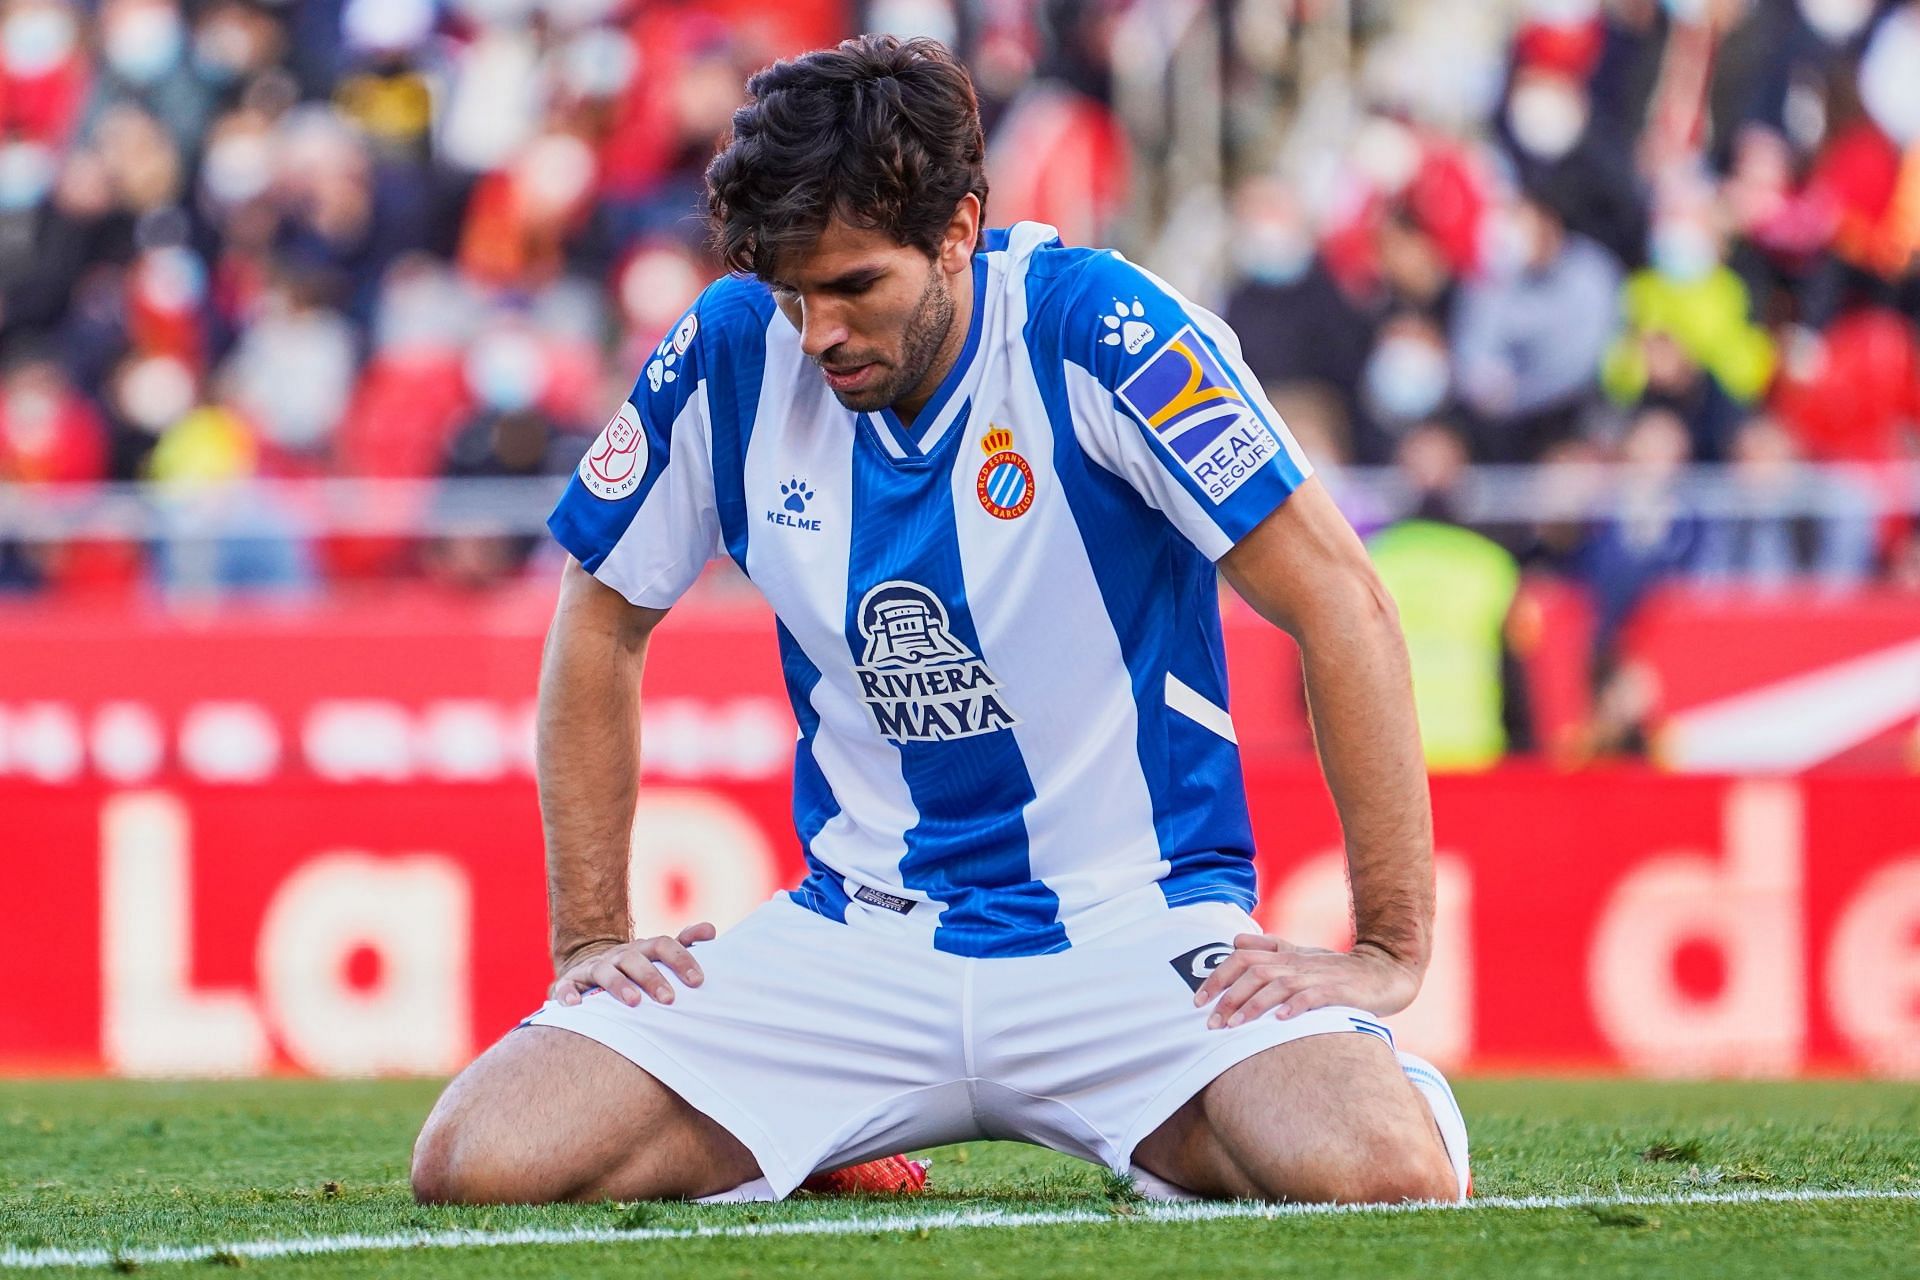 Espanyol face Cadiz in La Liga after their exit from the Copa del Rey over the weekend